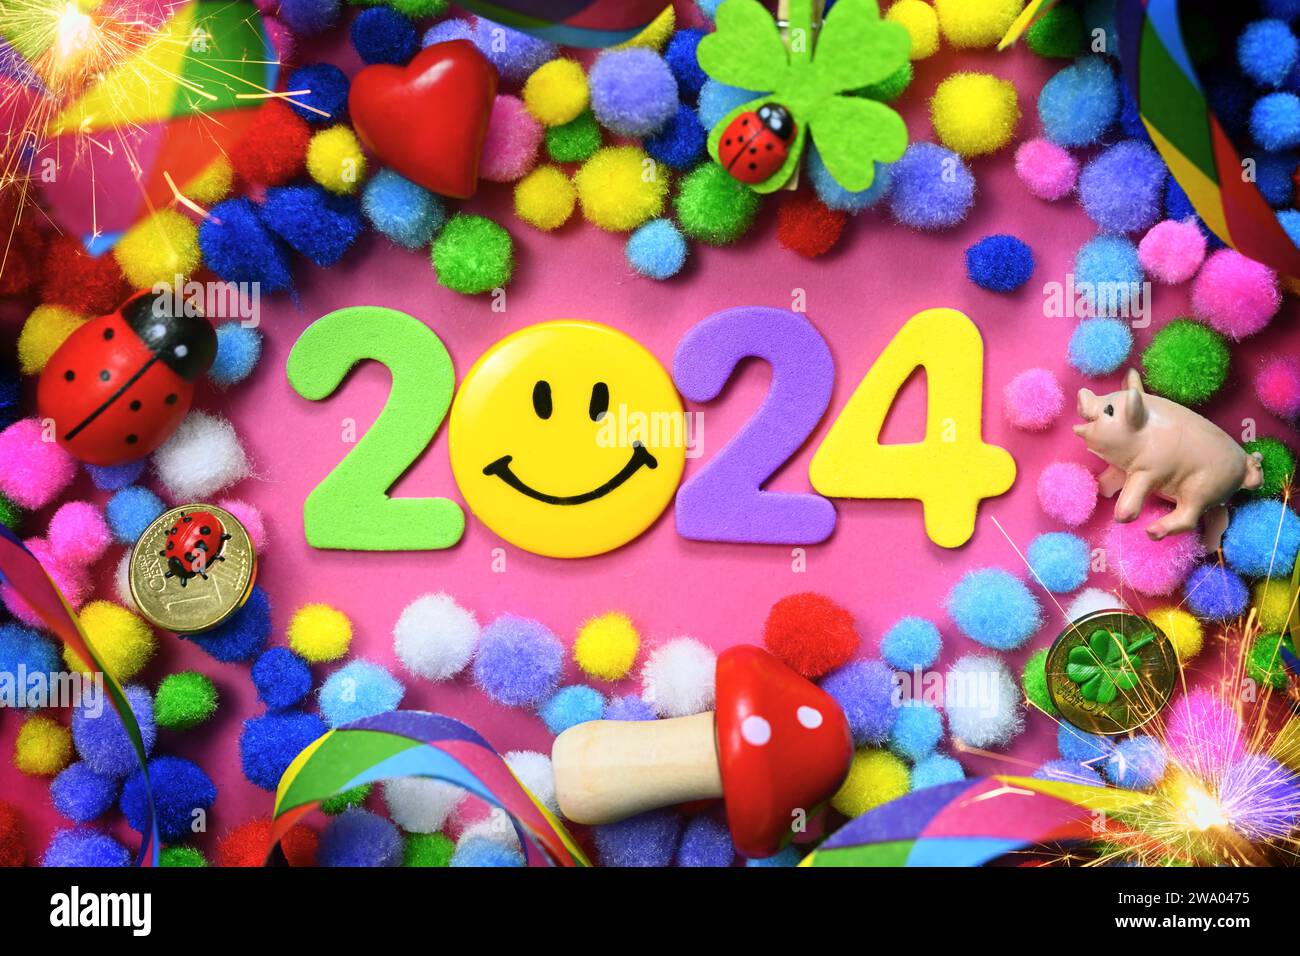 The Year 2024 With Smiley, Surrounded By Garlands And Good Luck Charms, Symbol Photo New Year 2024 Stock Photo